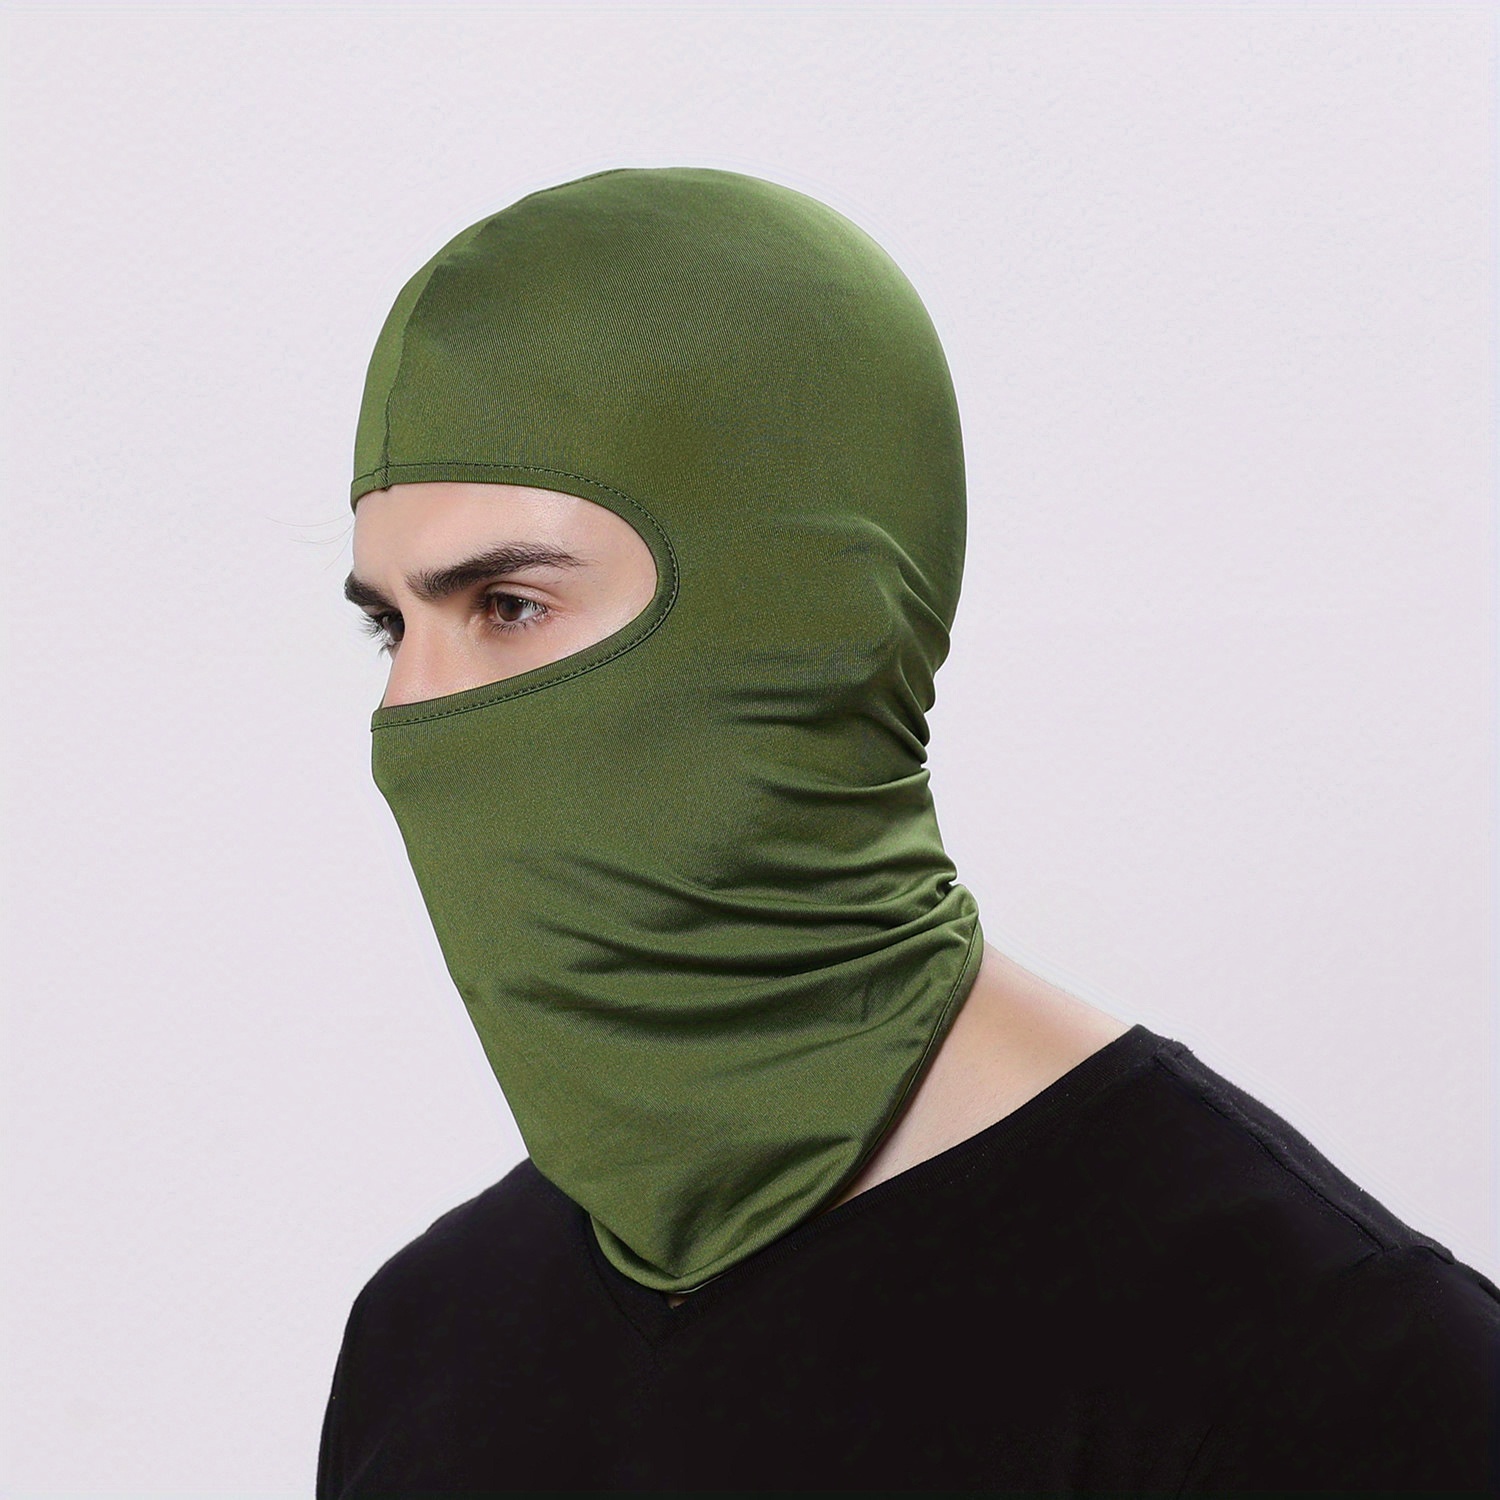 Unisex Balaclava Face Mask, Breathable Sun Screen Windproof Dust Proof Face Cover, Buff For Riding Cycling